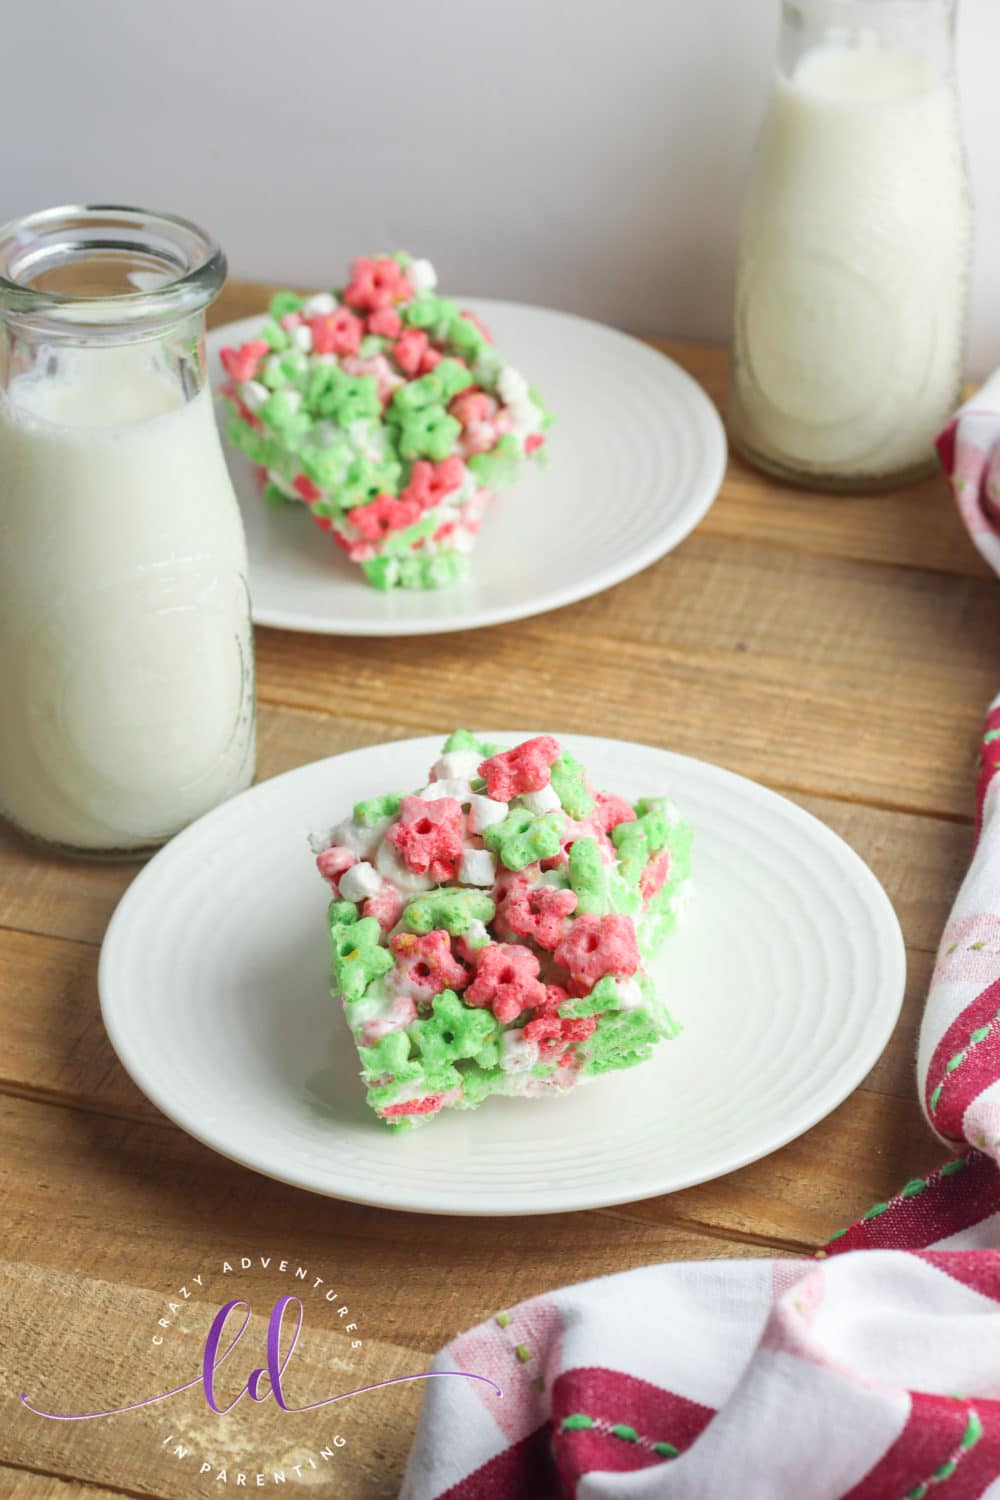 Delicious Elf on the Shelf Cereal Treats